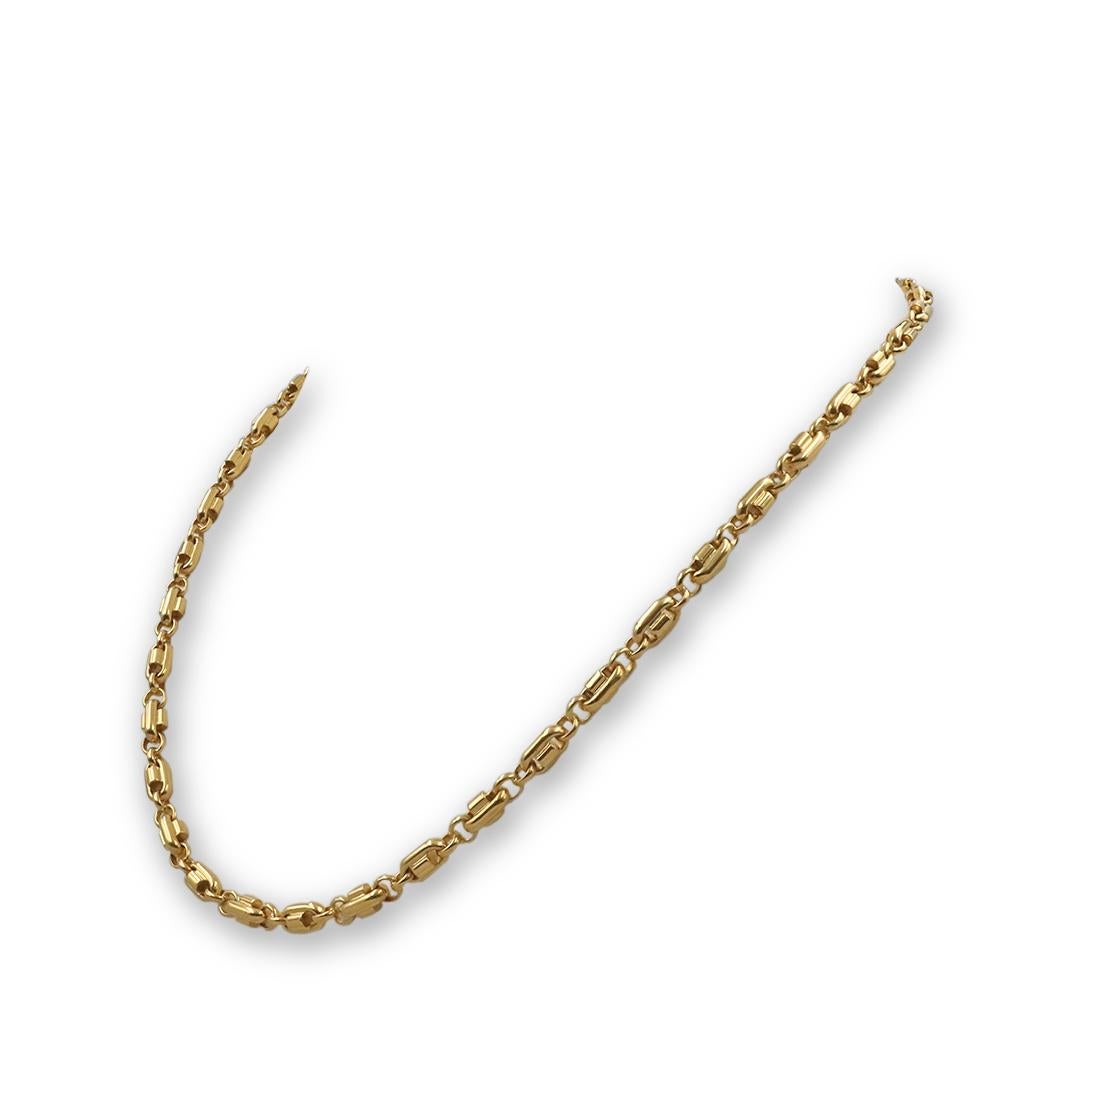 22 karat yellow gold necklace comprised of alternating oval-shaped fancy links and high polished round links. The chain measures 20 inches in length with a lobster clasp. Italy, 917, with hallmark. The necklace is not presented with the original